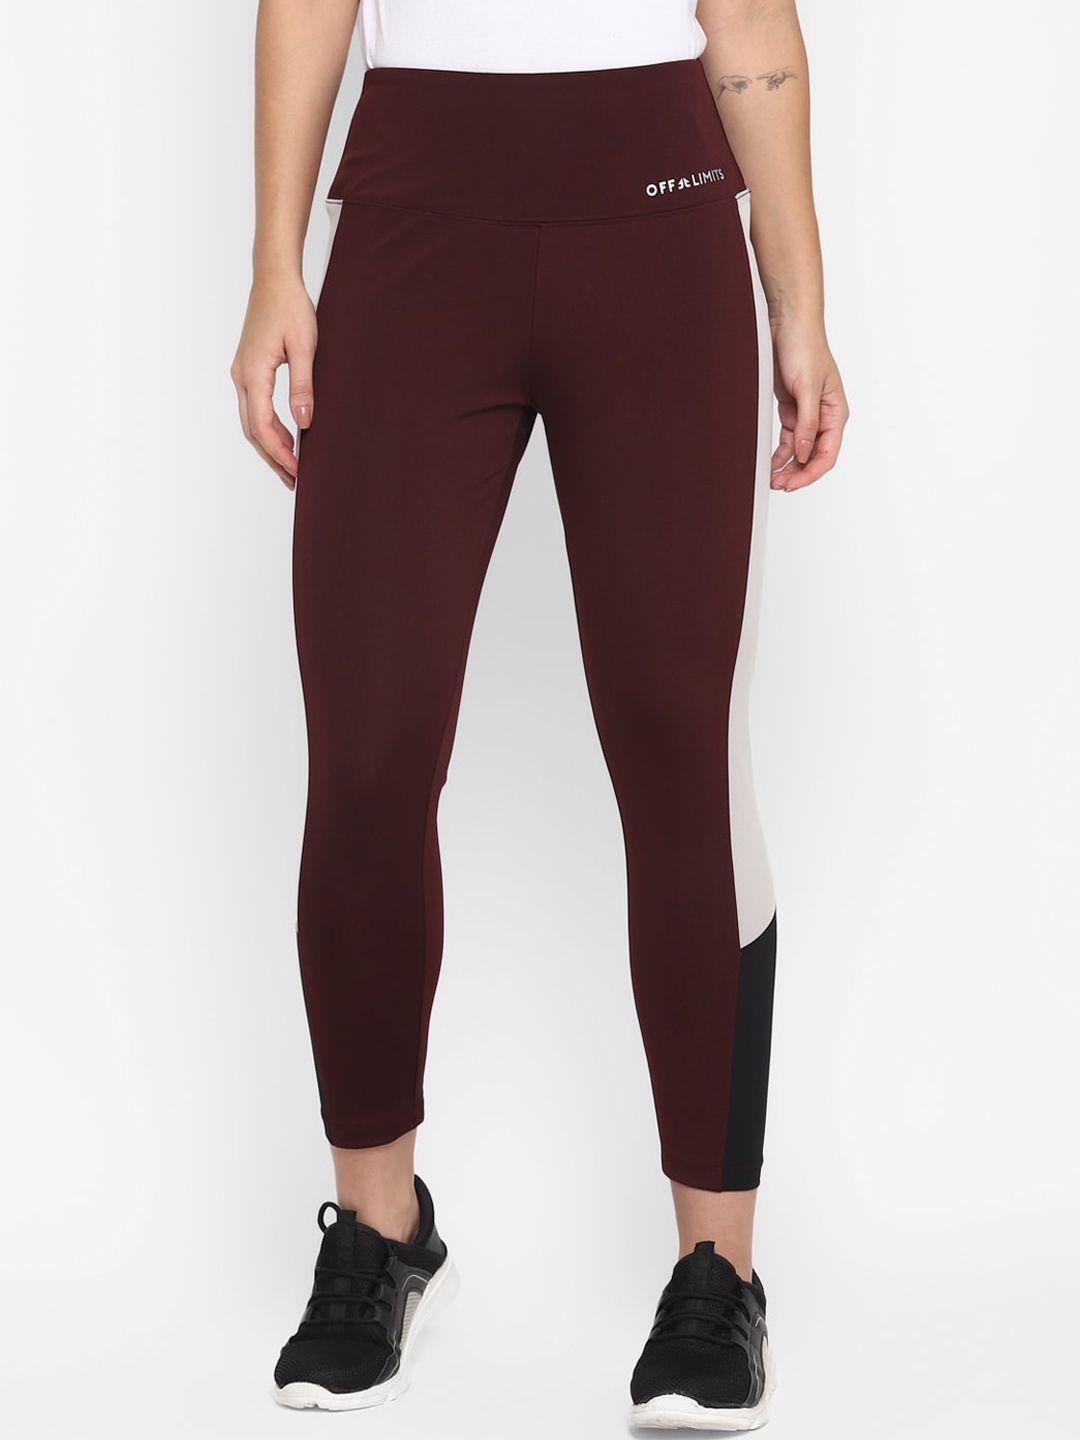 off-limits-women-maroon-&-white-solid-anti-microbial-tights